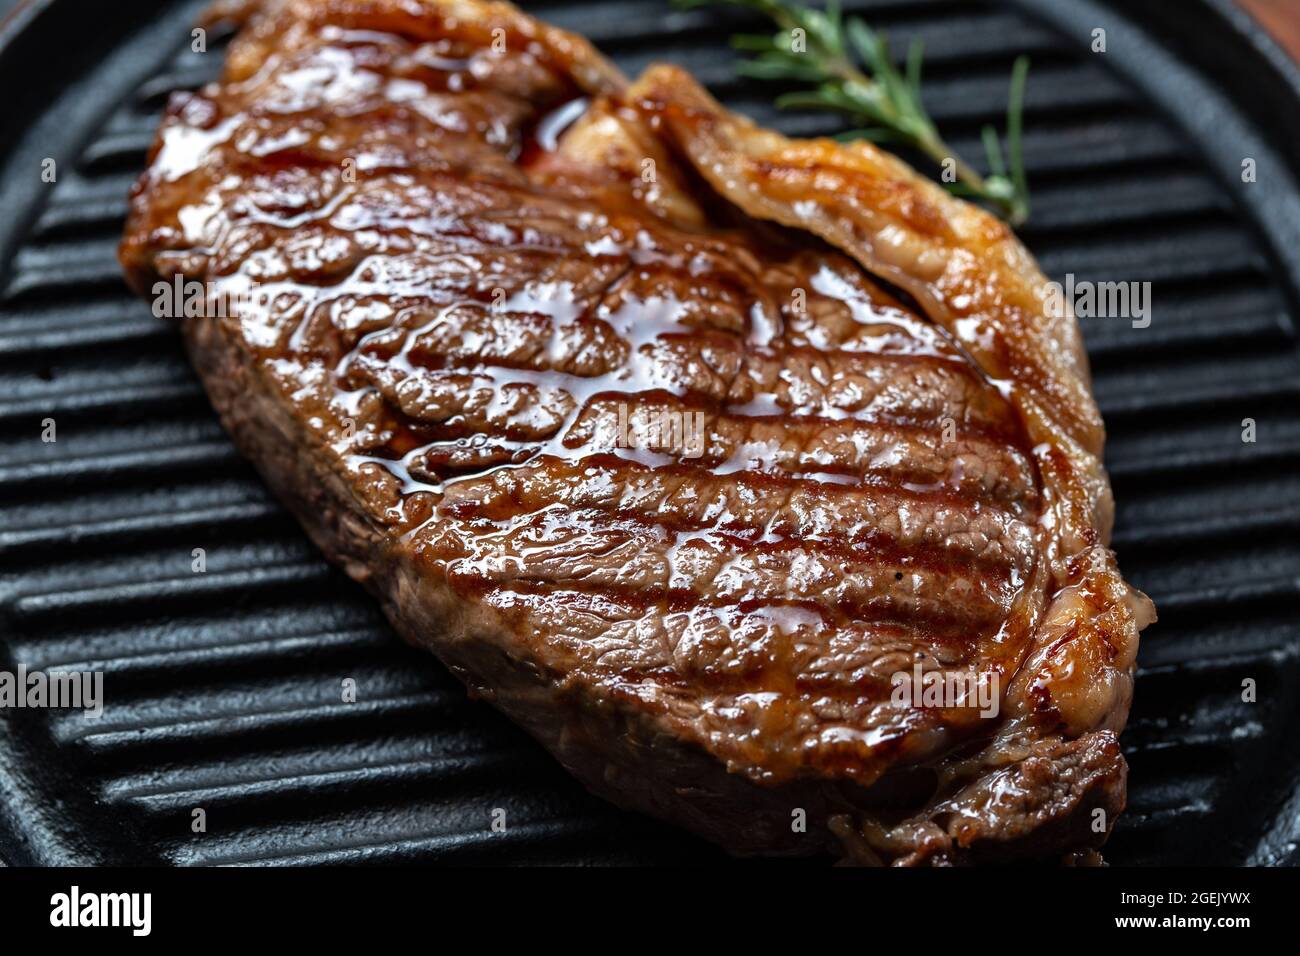 Fried strip loin steak on vintage cast iron grill pan and cutlery set, black background. Top view Stock Photo